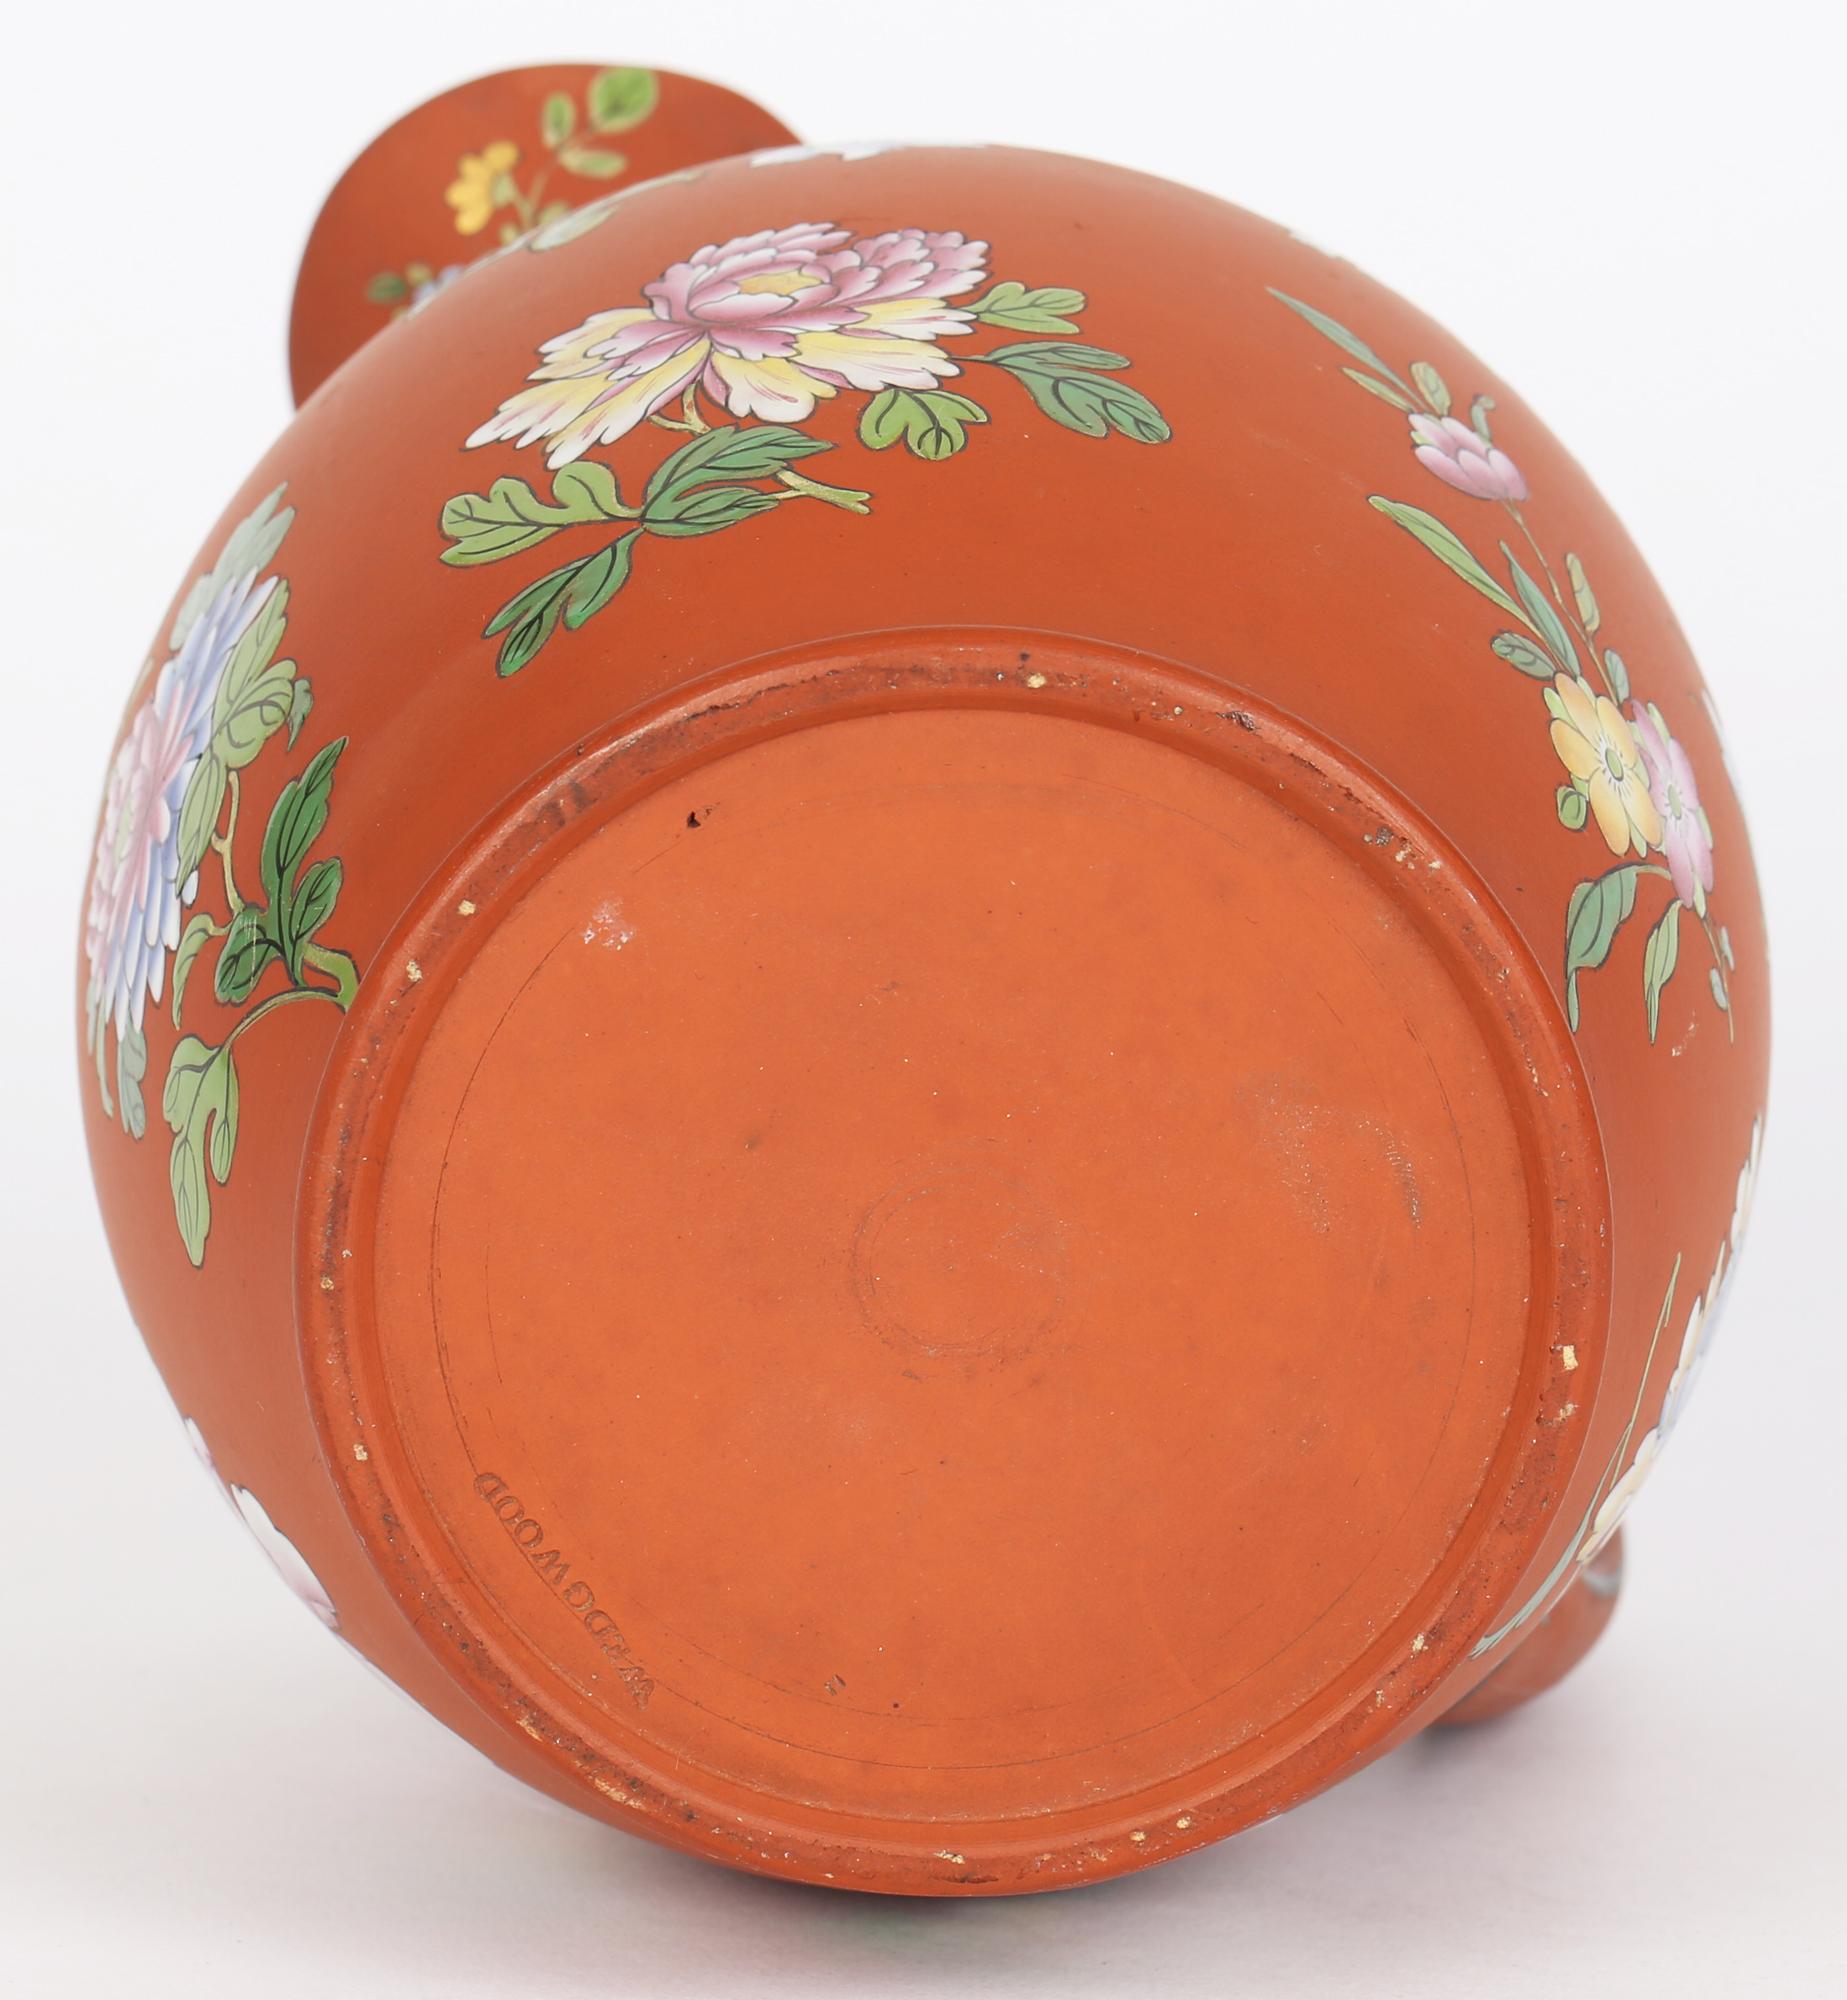 19th Century Wedgwood Rosso Antico Floral Enameled Terracotta Jug